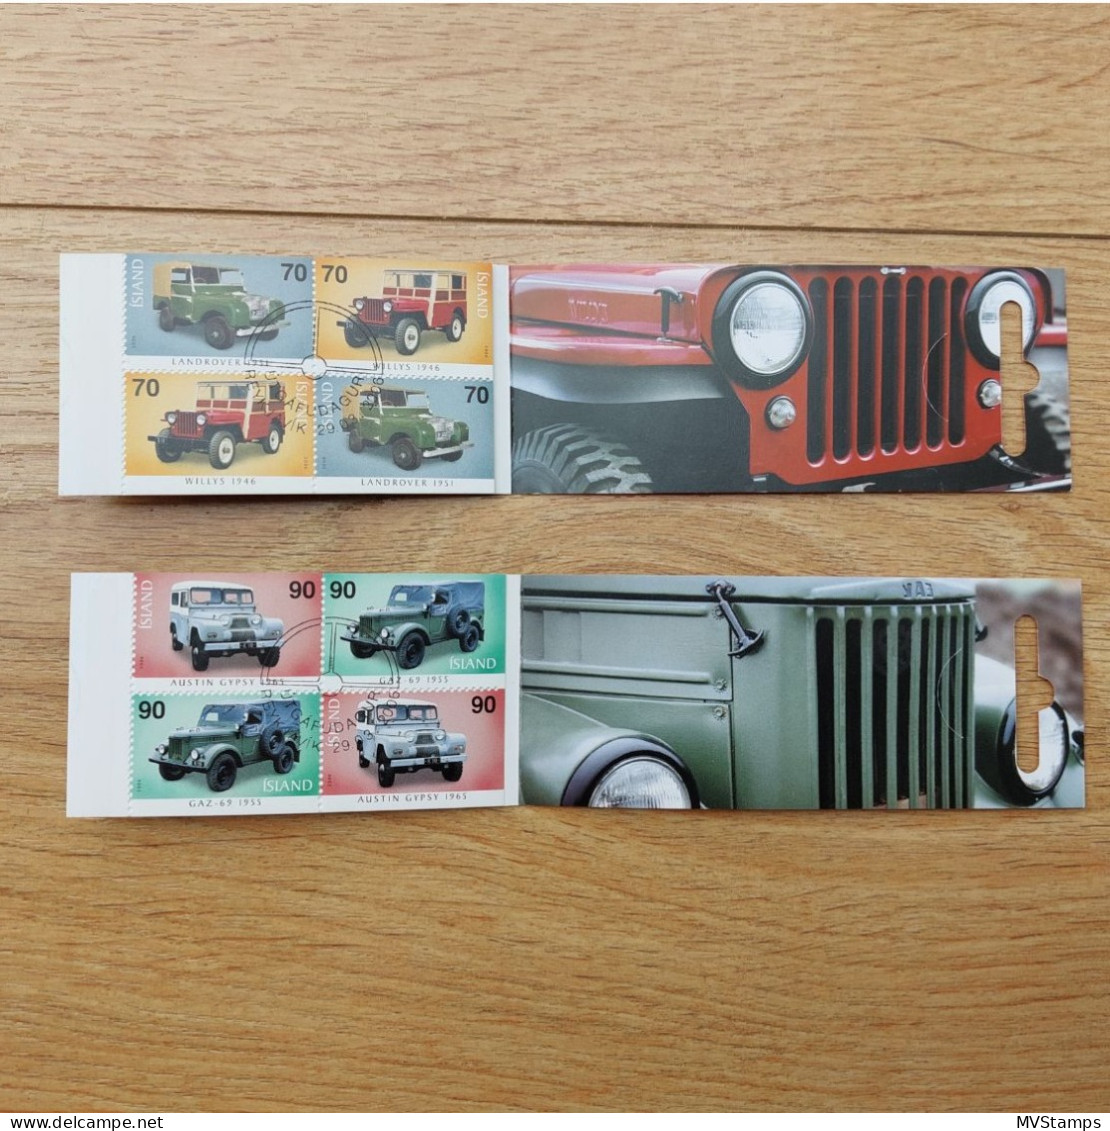 Iceland 2006 Set Stampbooklets Auto's/Cars Stamps (Michel MH 22/23) Used - Booklets